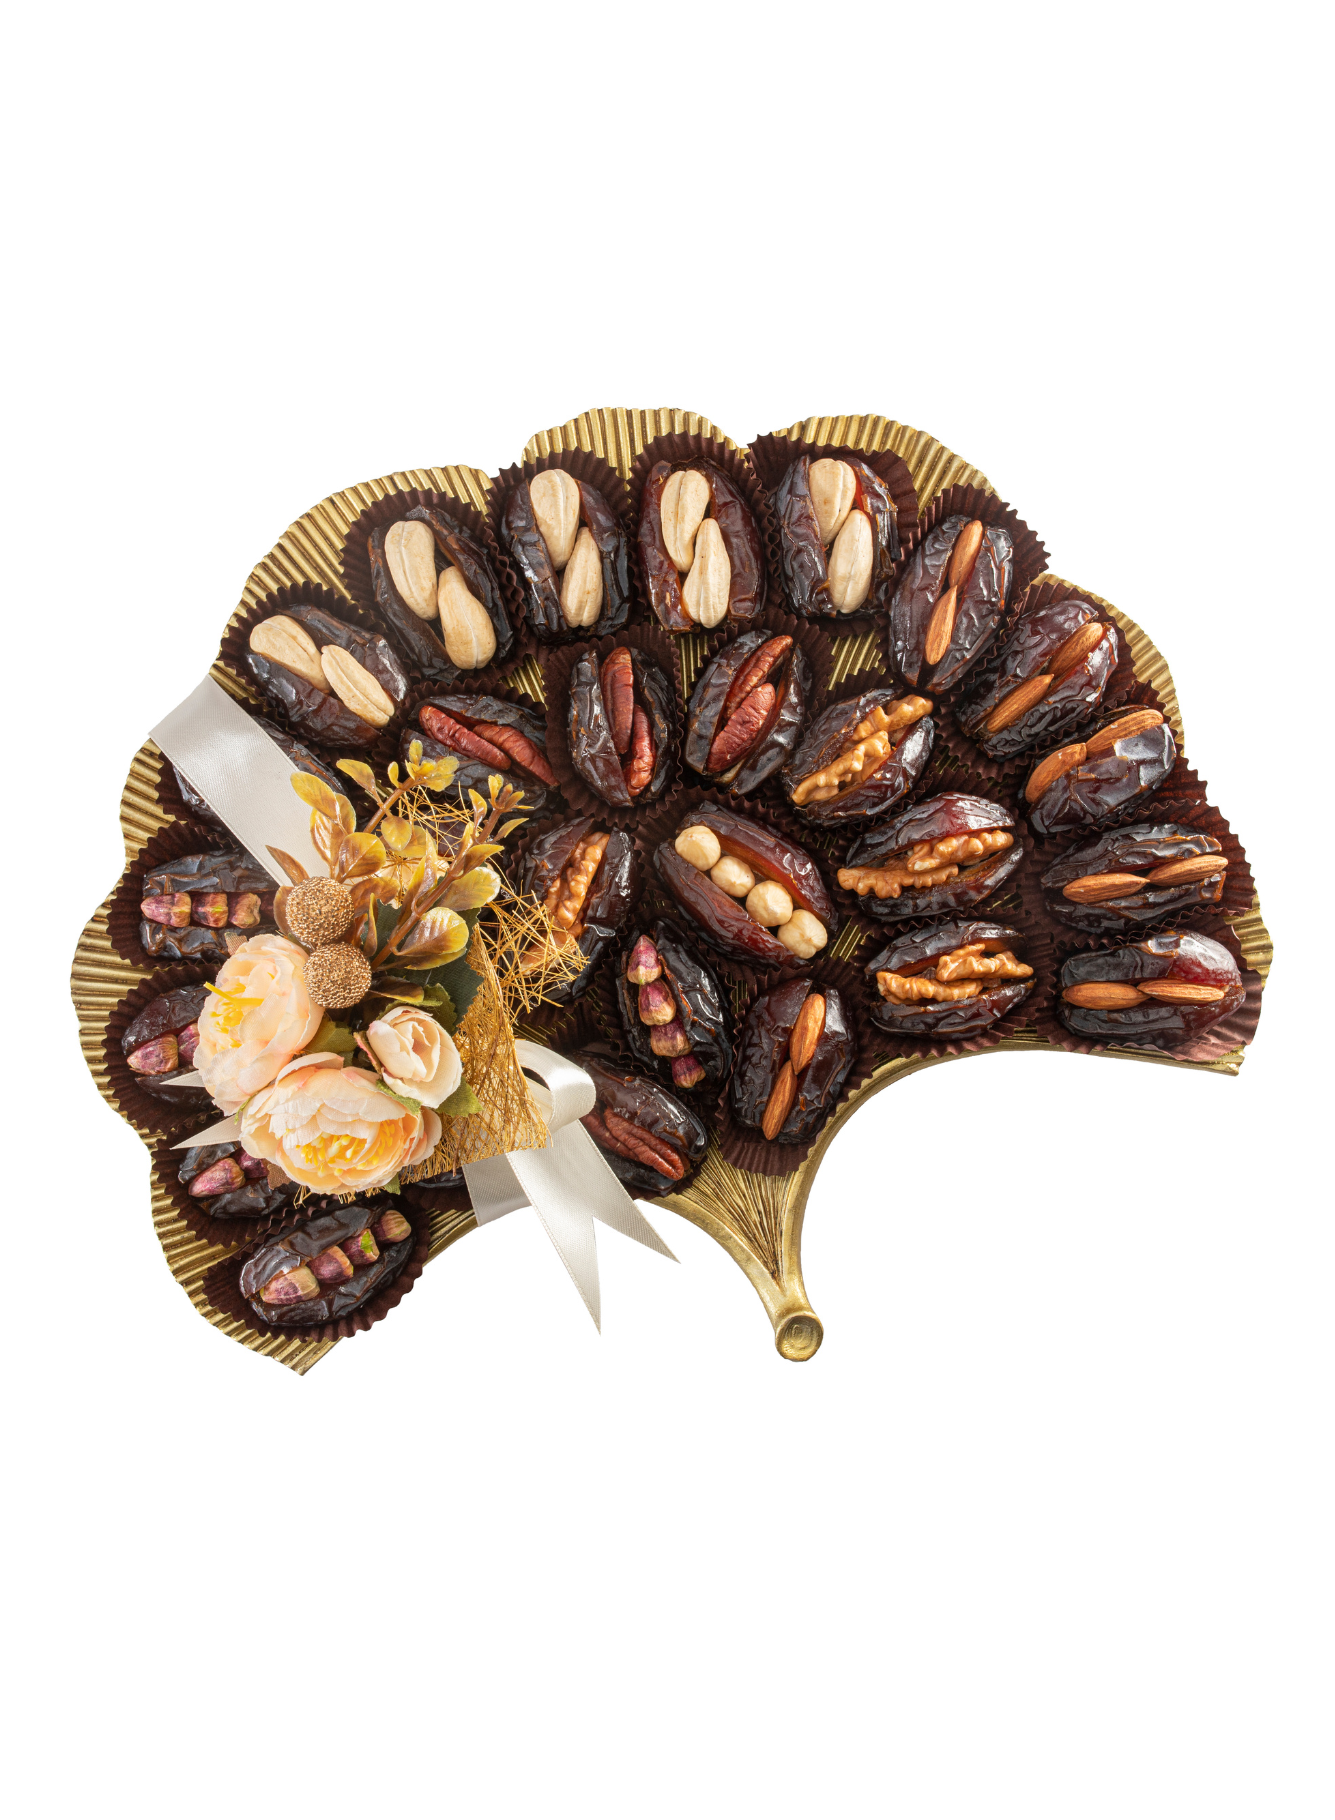 Medjoul Dates with Golden Platter with Ribbon (32 Pcs)